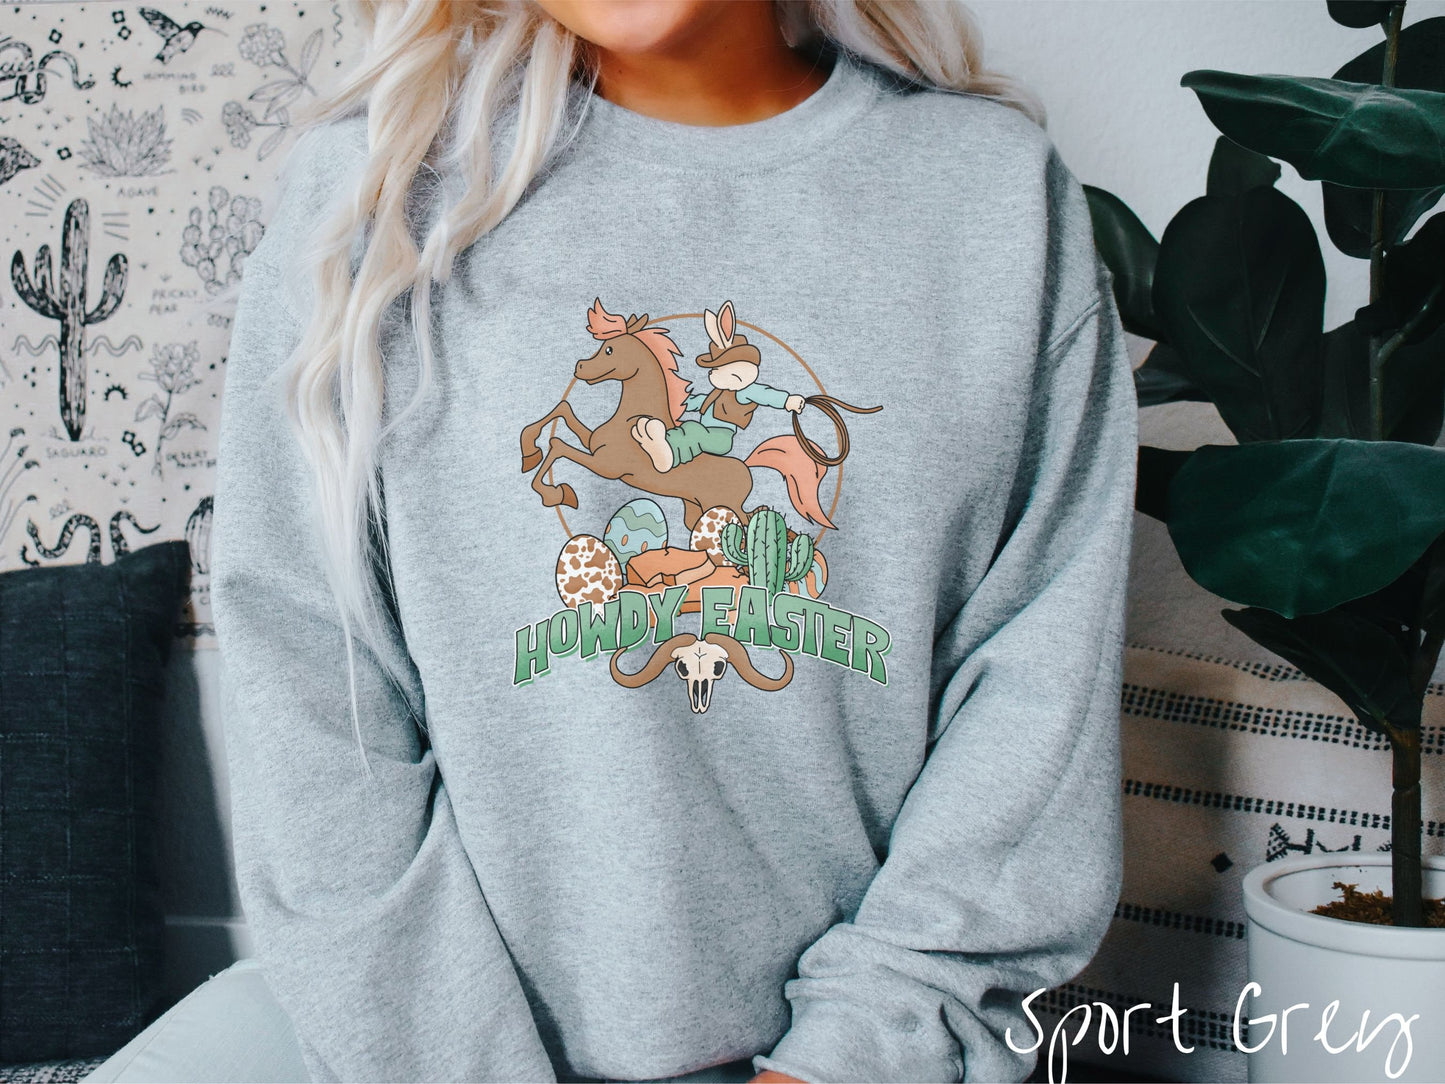 A woman wearing a cute, vintage sport grey colored sweatshirt with a cowboy rabbit riding a bucking, brown horse while holding a lasso rope. Below is green text Howdy Easter along with colorful Easter eggs, a green cactus, and a horned bull skull.